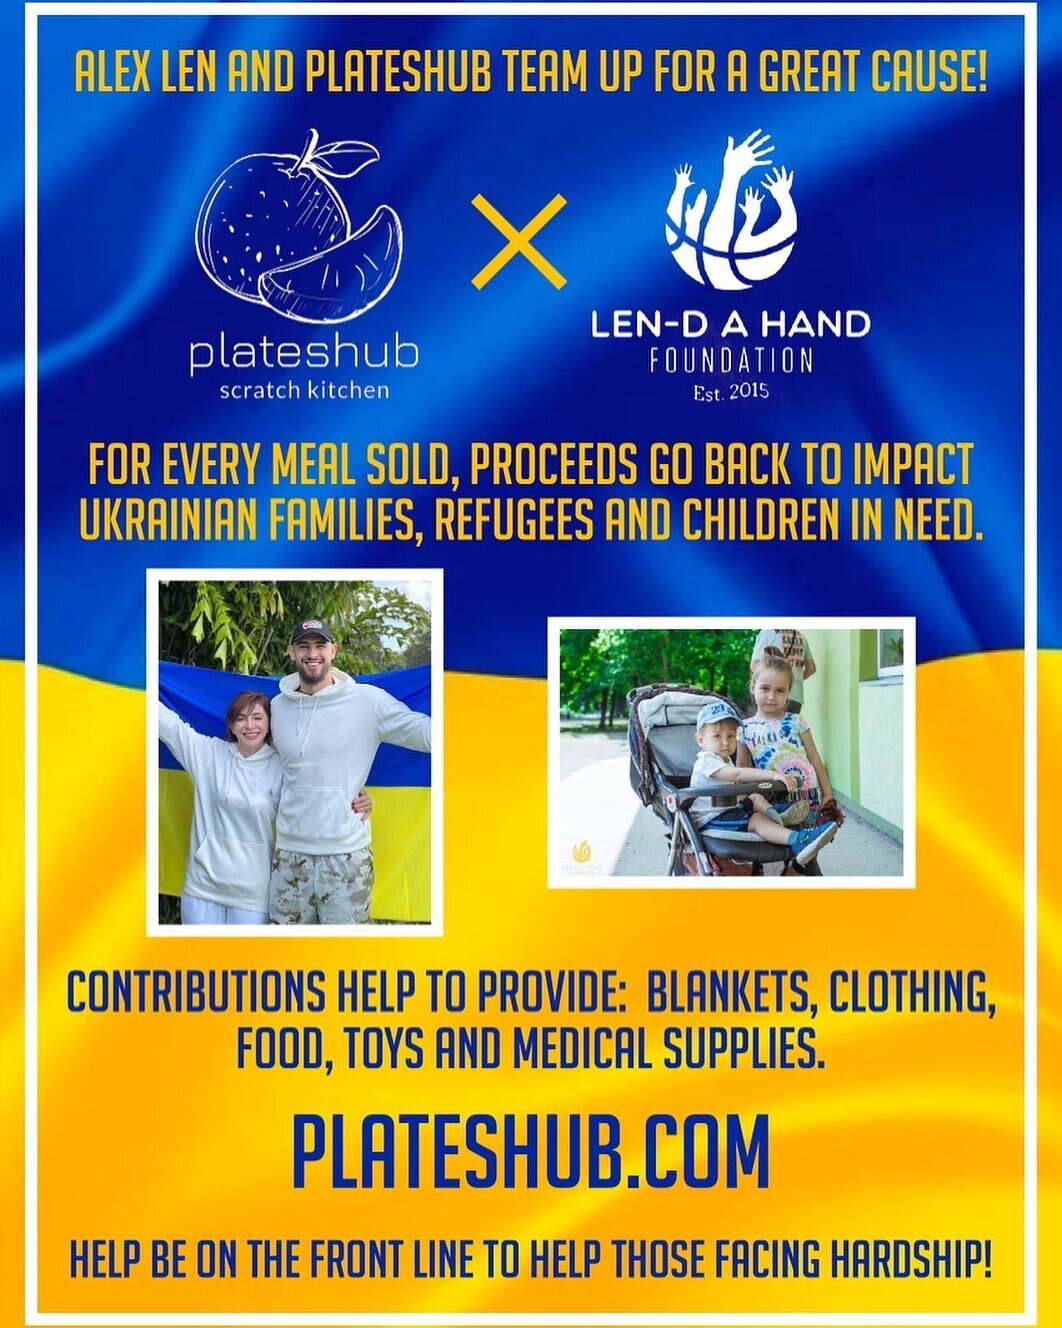 We are teaming up with @plateshub to make an impact so those facing hardship have food, and necessities! 

@Plateshub will be matching contributions up to $2,000.00 and with your purchase of a meal today proceeds will directly impact the cause. Help 